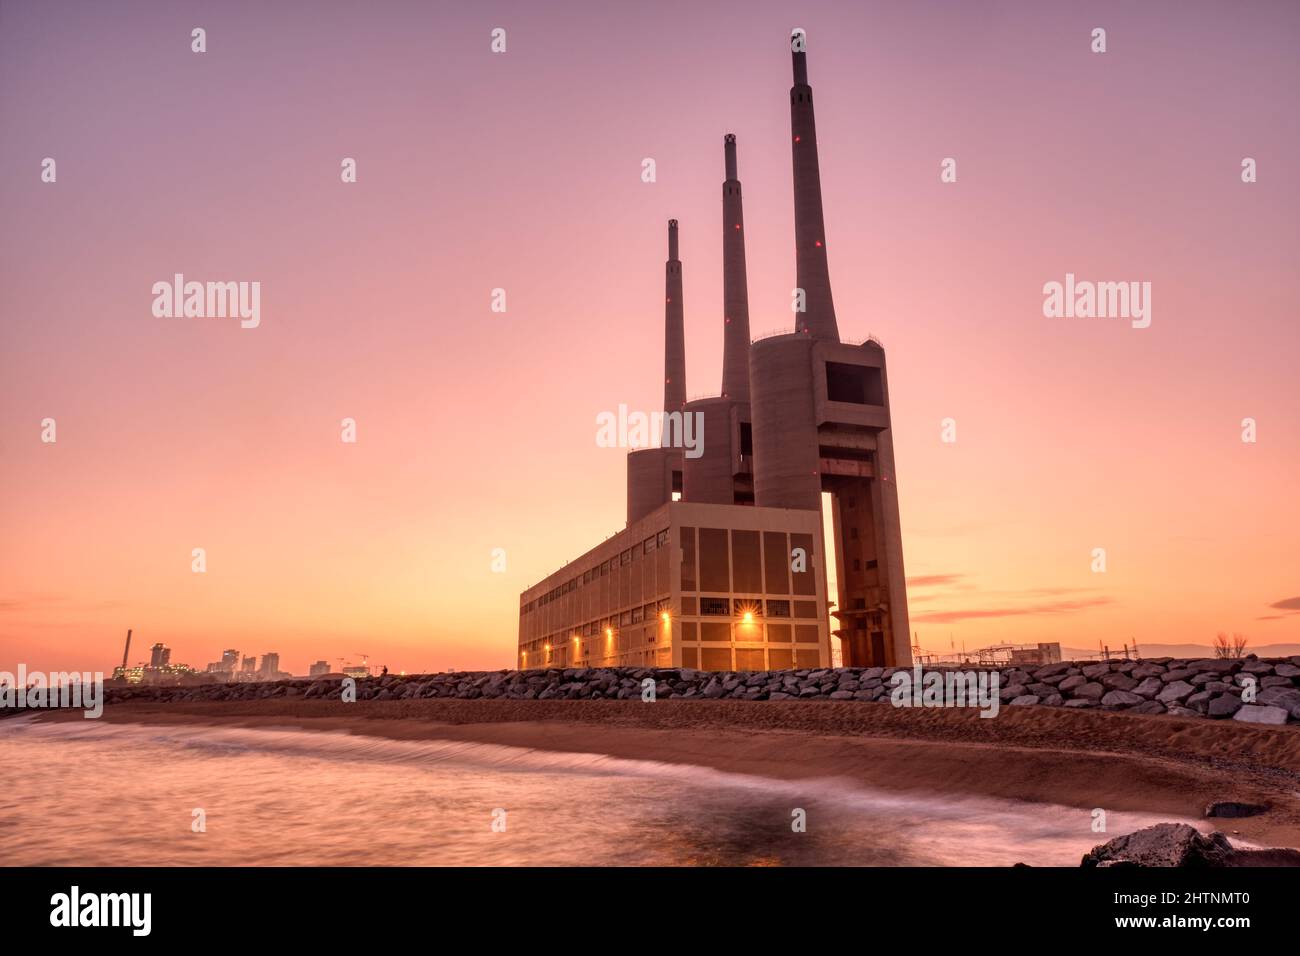 The decommissioned thermal power station at Sant Adria near Barcelona at sunset Stock Photo